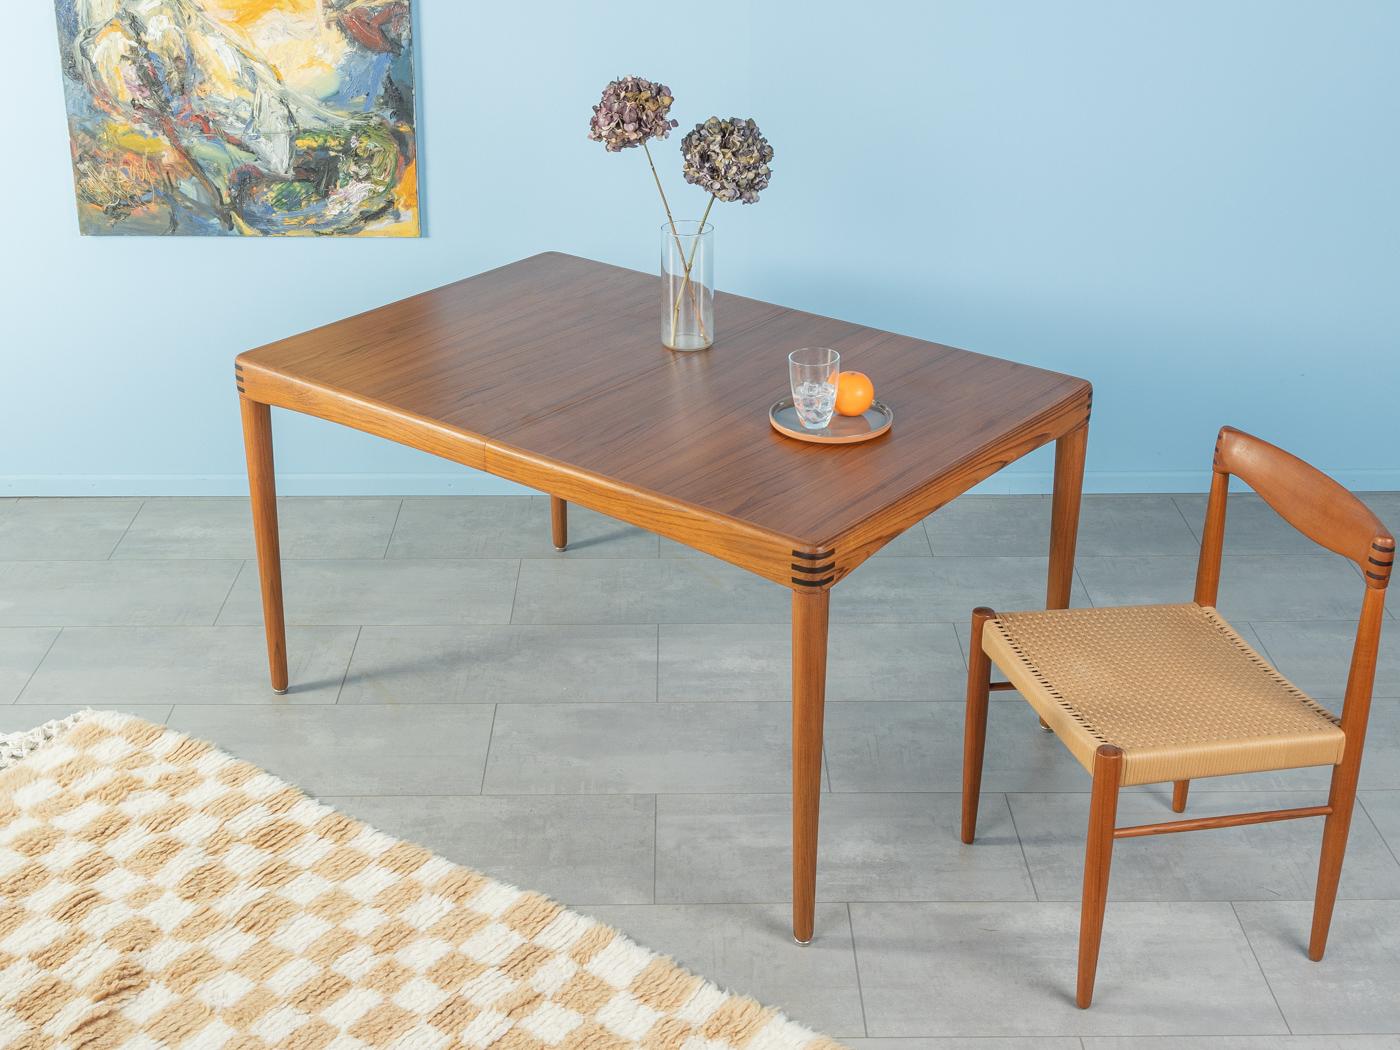 Classic extendable teak dining table from the 1960s by H.W. Klein for Bramin. Solid frame and veneered table top with solid wood edge. The insert plate can be stowed under the table top.

accomplished design: perfect proportions and visible